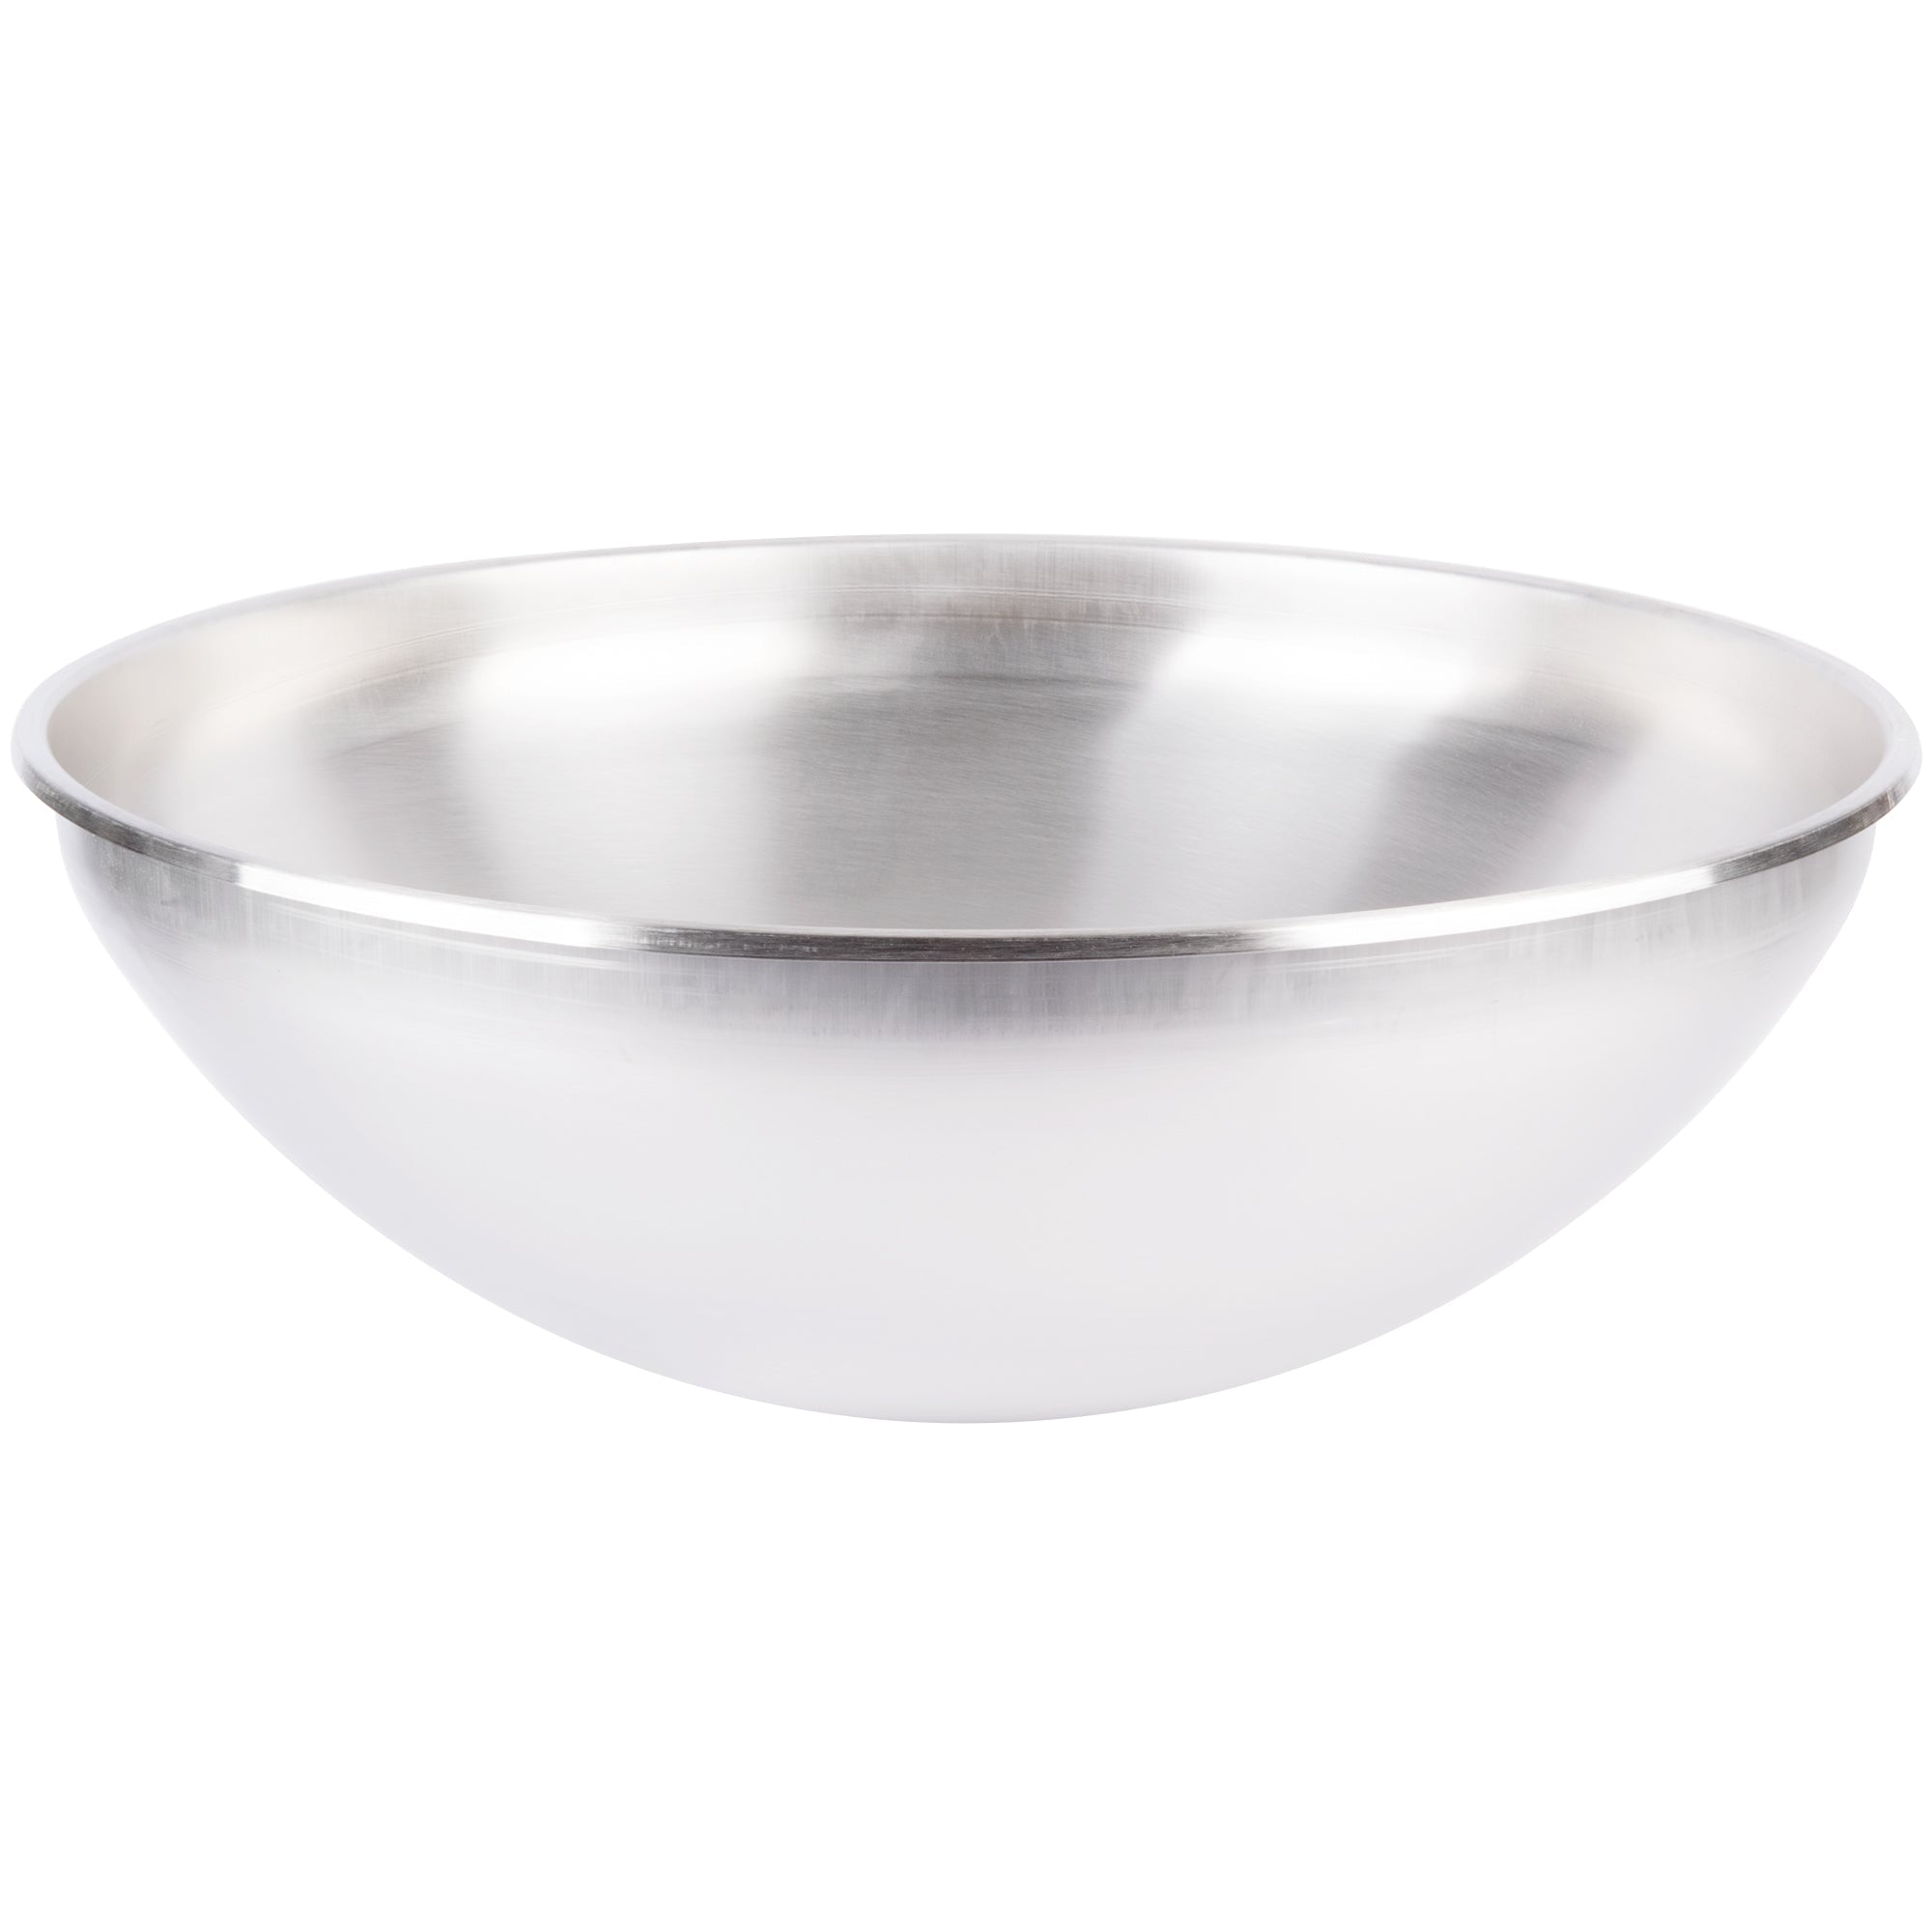 Vollrath 69014 Stainless Steel Mixing Bowl - 1 1/2 qt.